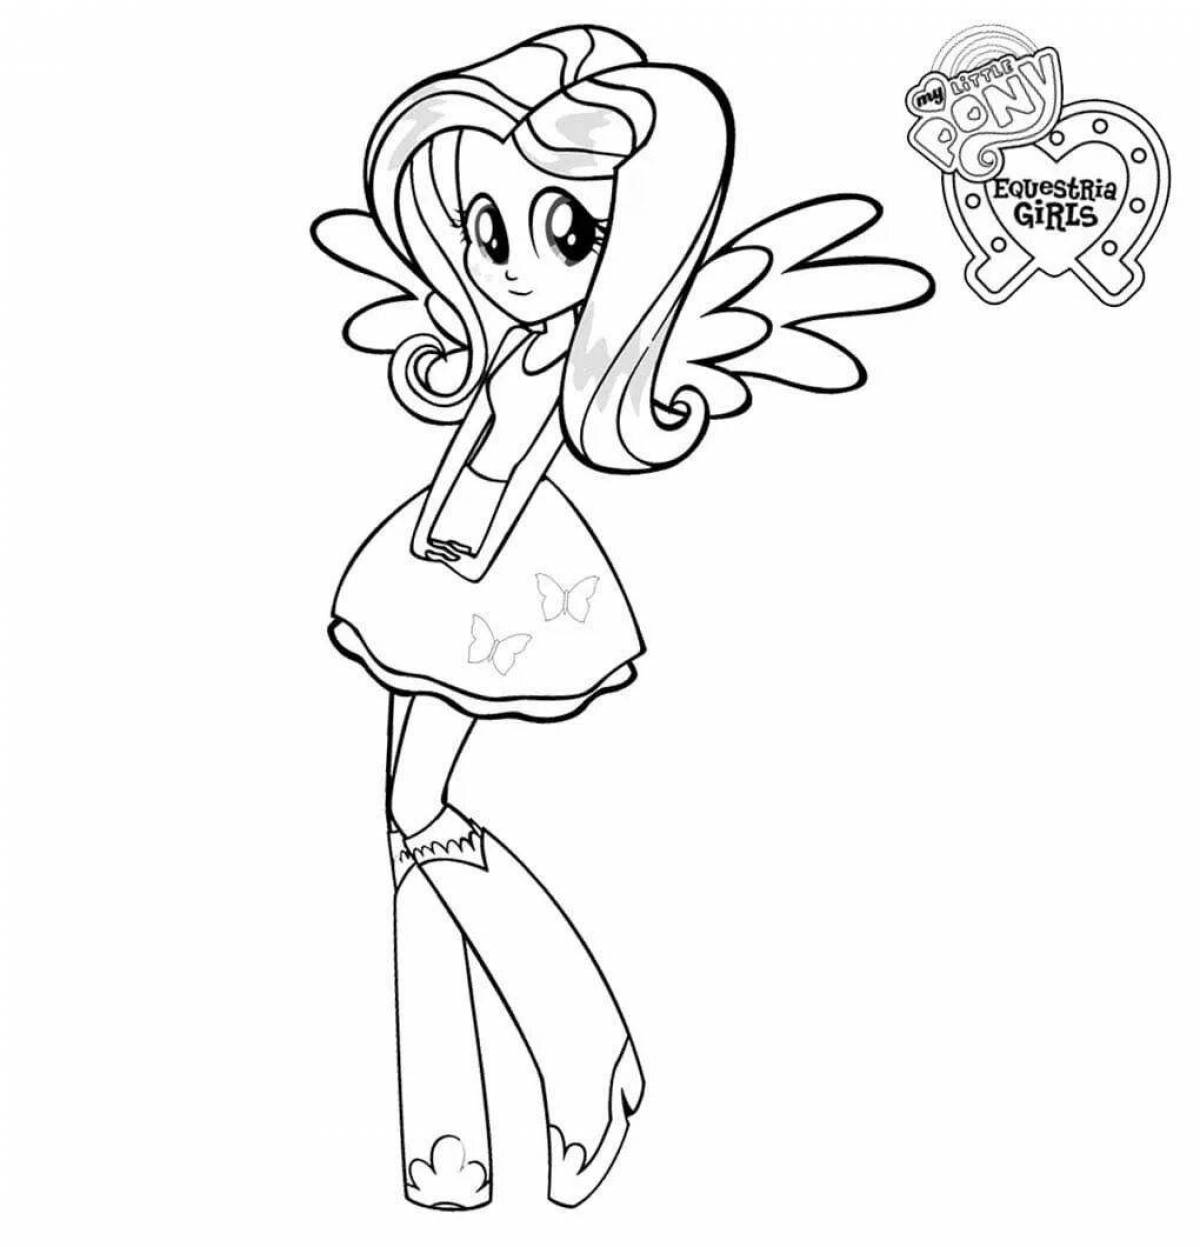 Great fluttershy coloring book